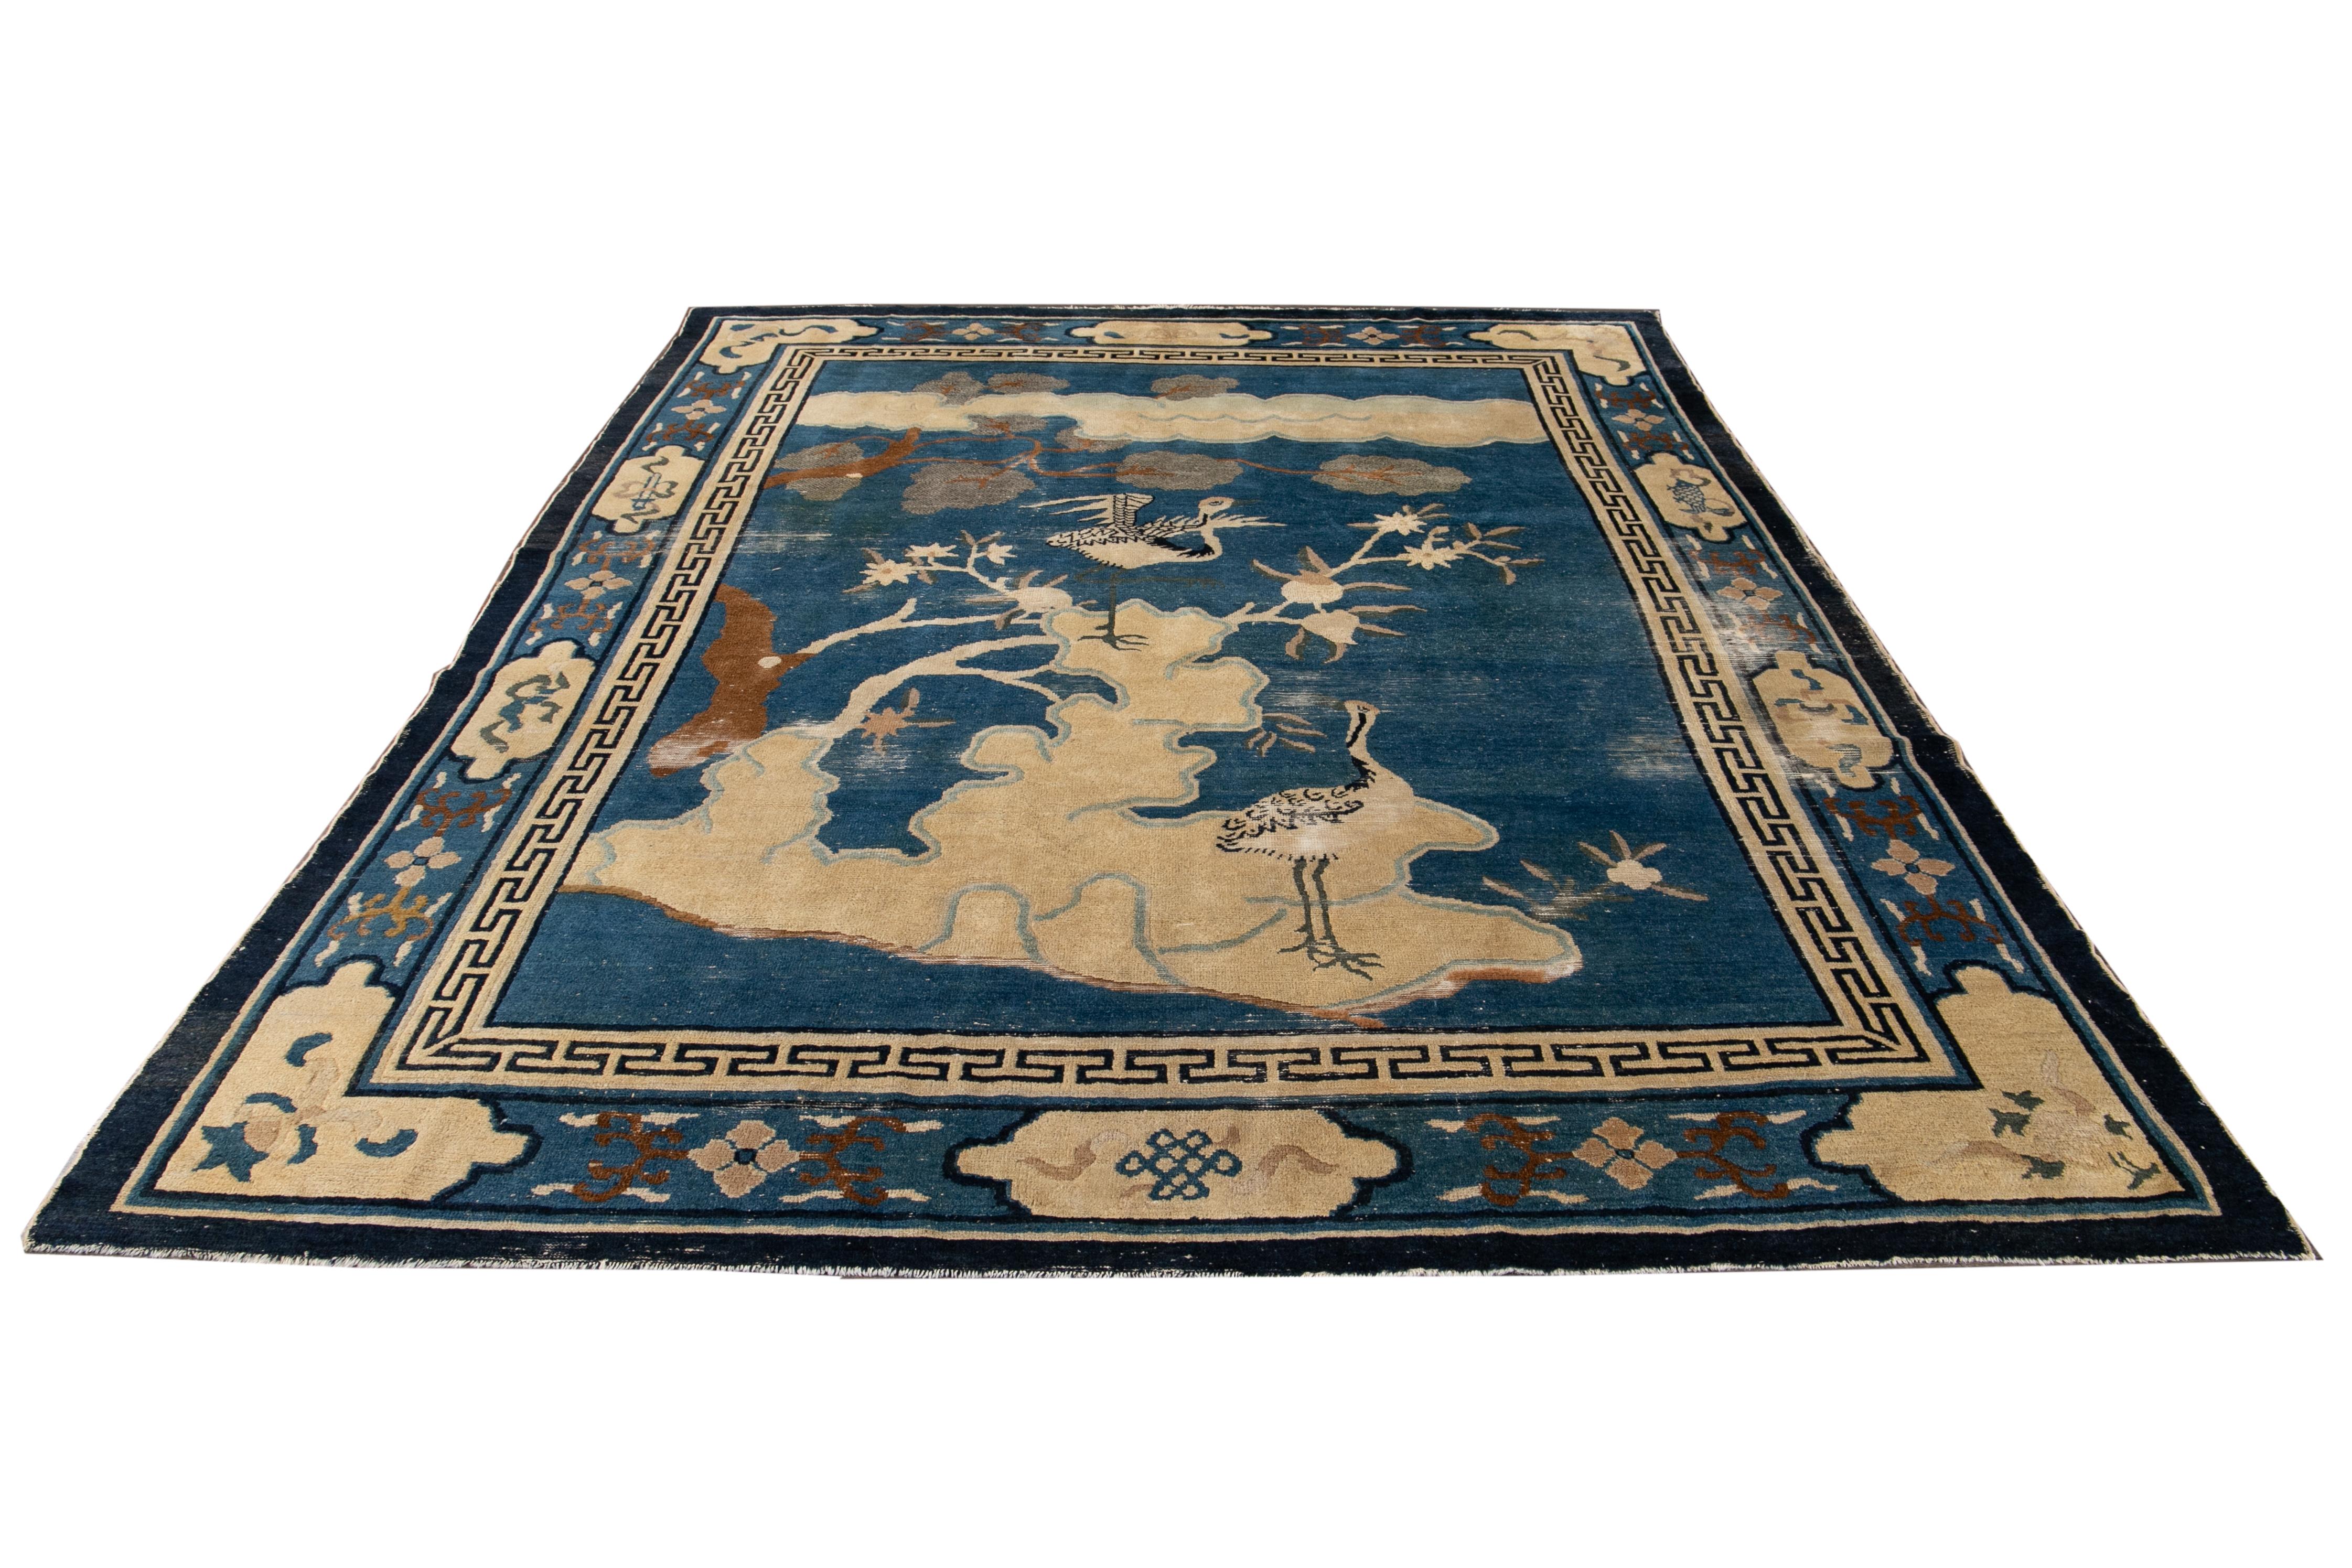 Art Deco Antique Blue Chinese Peking Bird Design Wool Rug 7 Ft 8 In X 9 Ft 5 In. For Sale